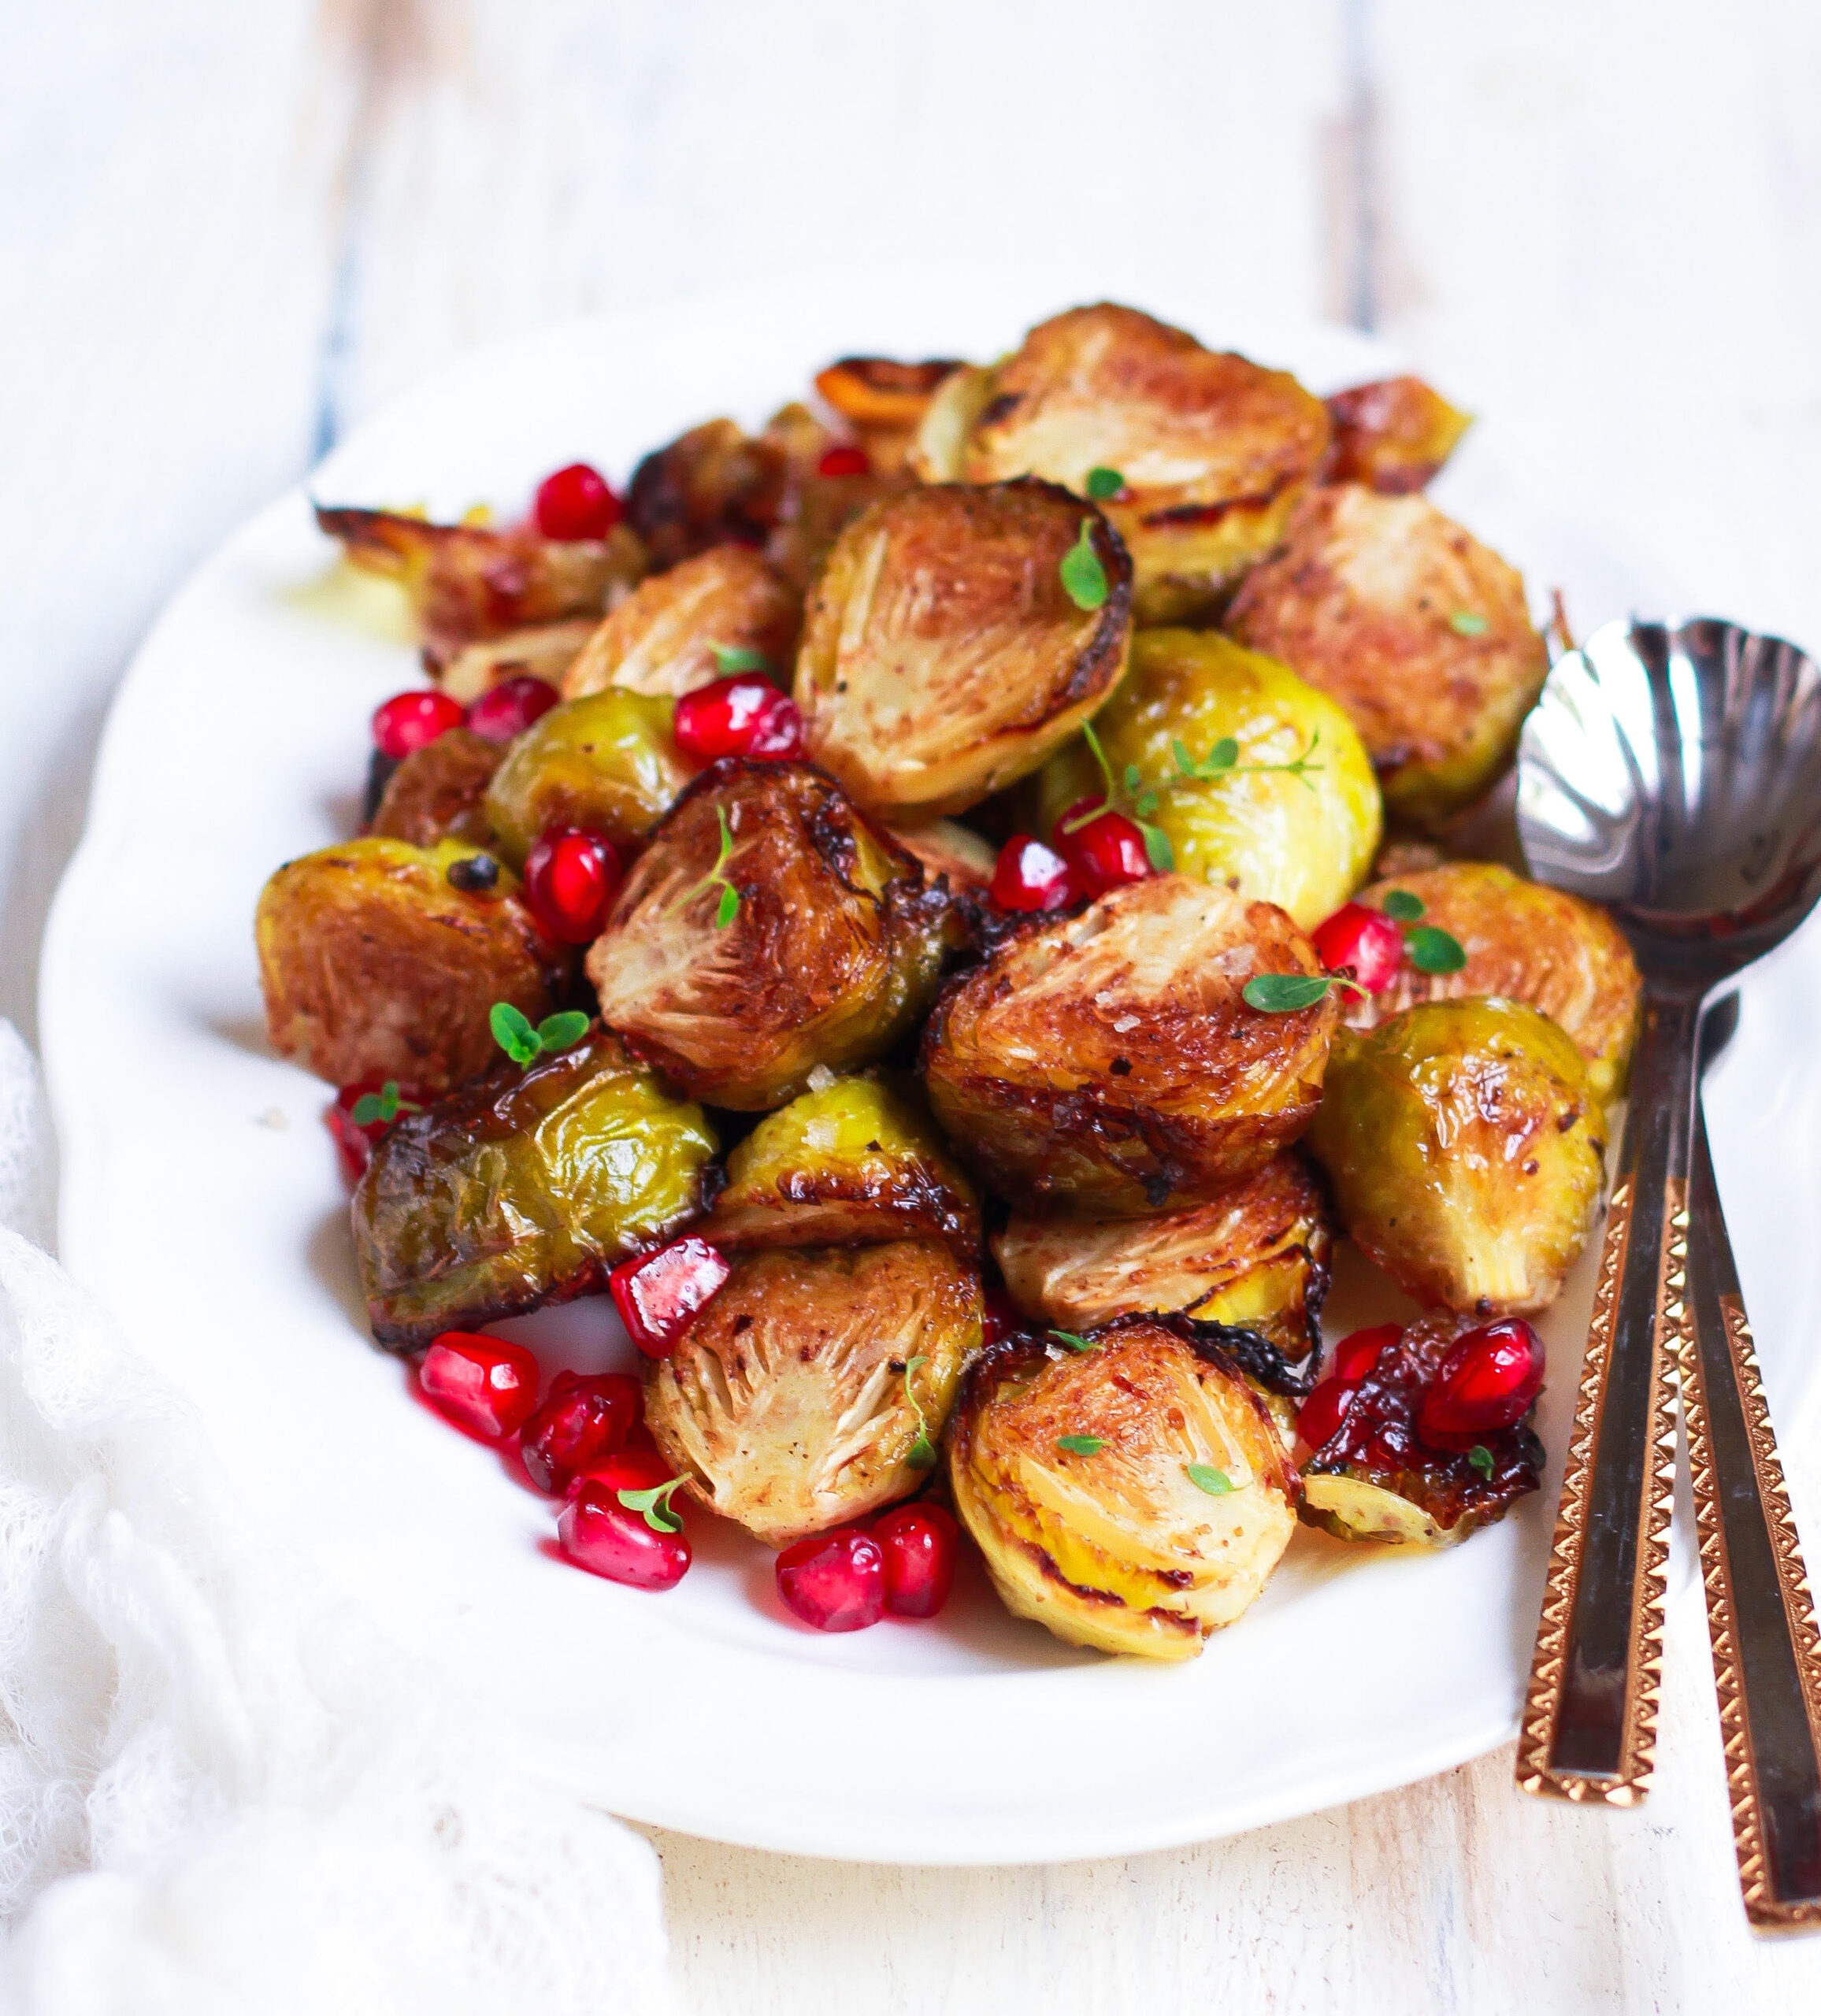 Roasted Brussel Sprouts easy vegan recipe